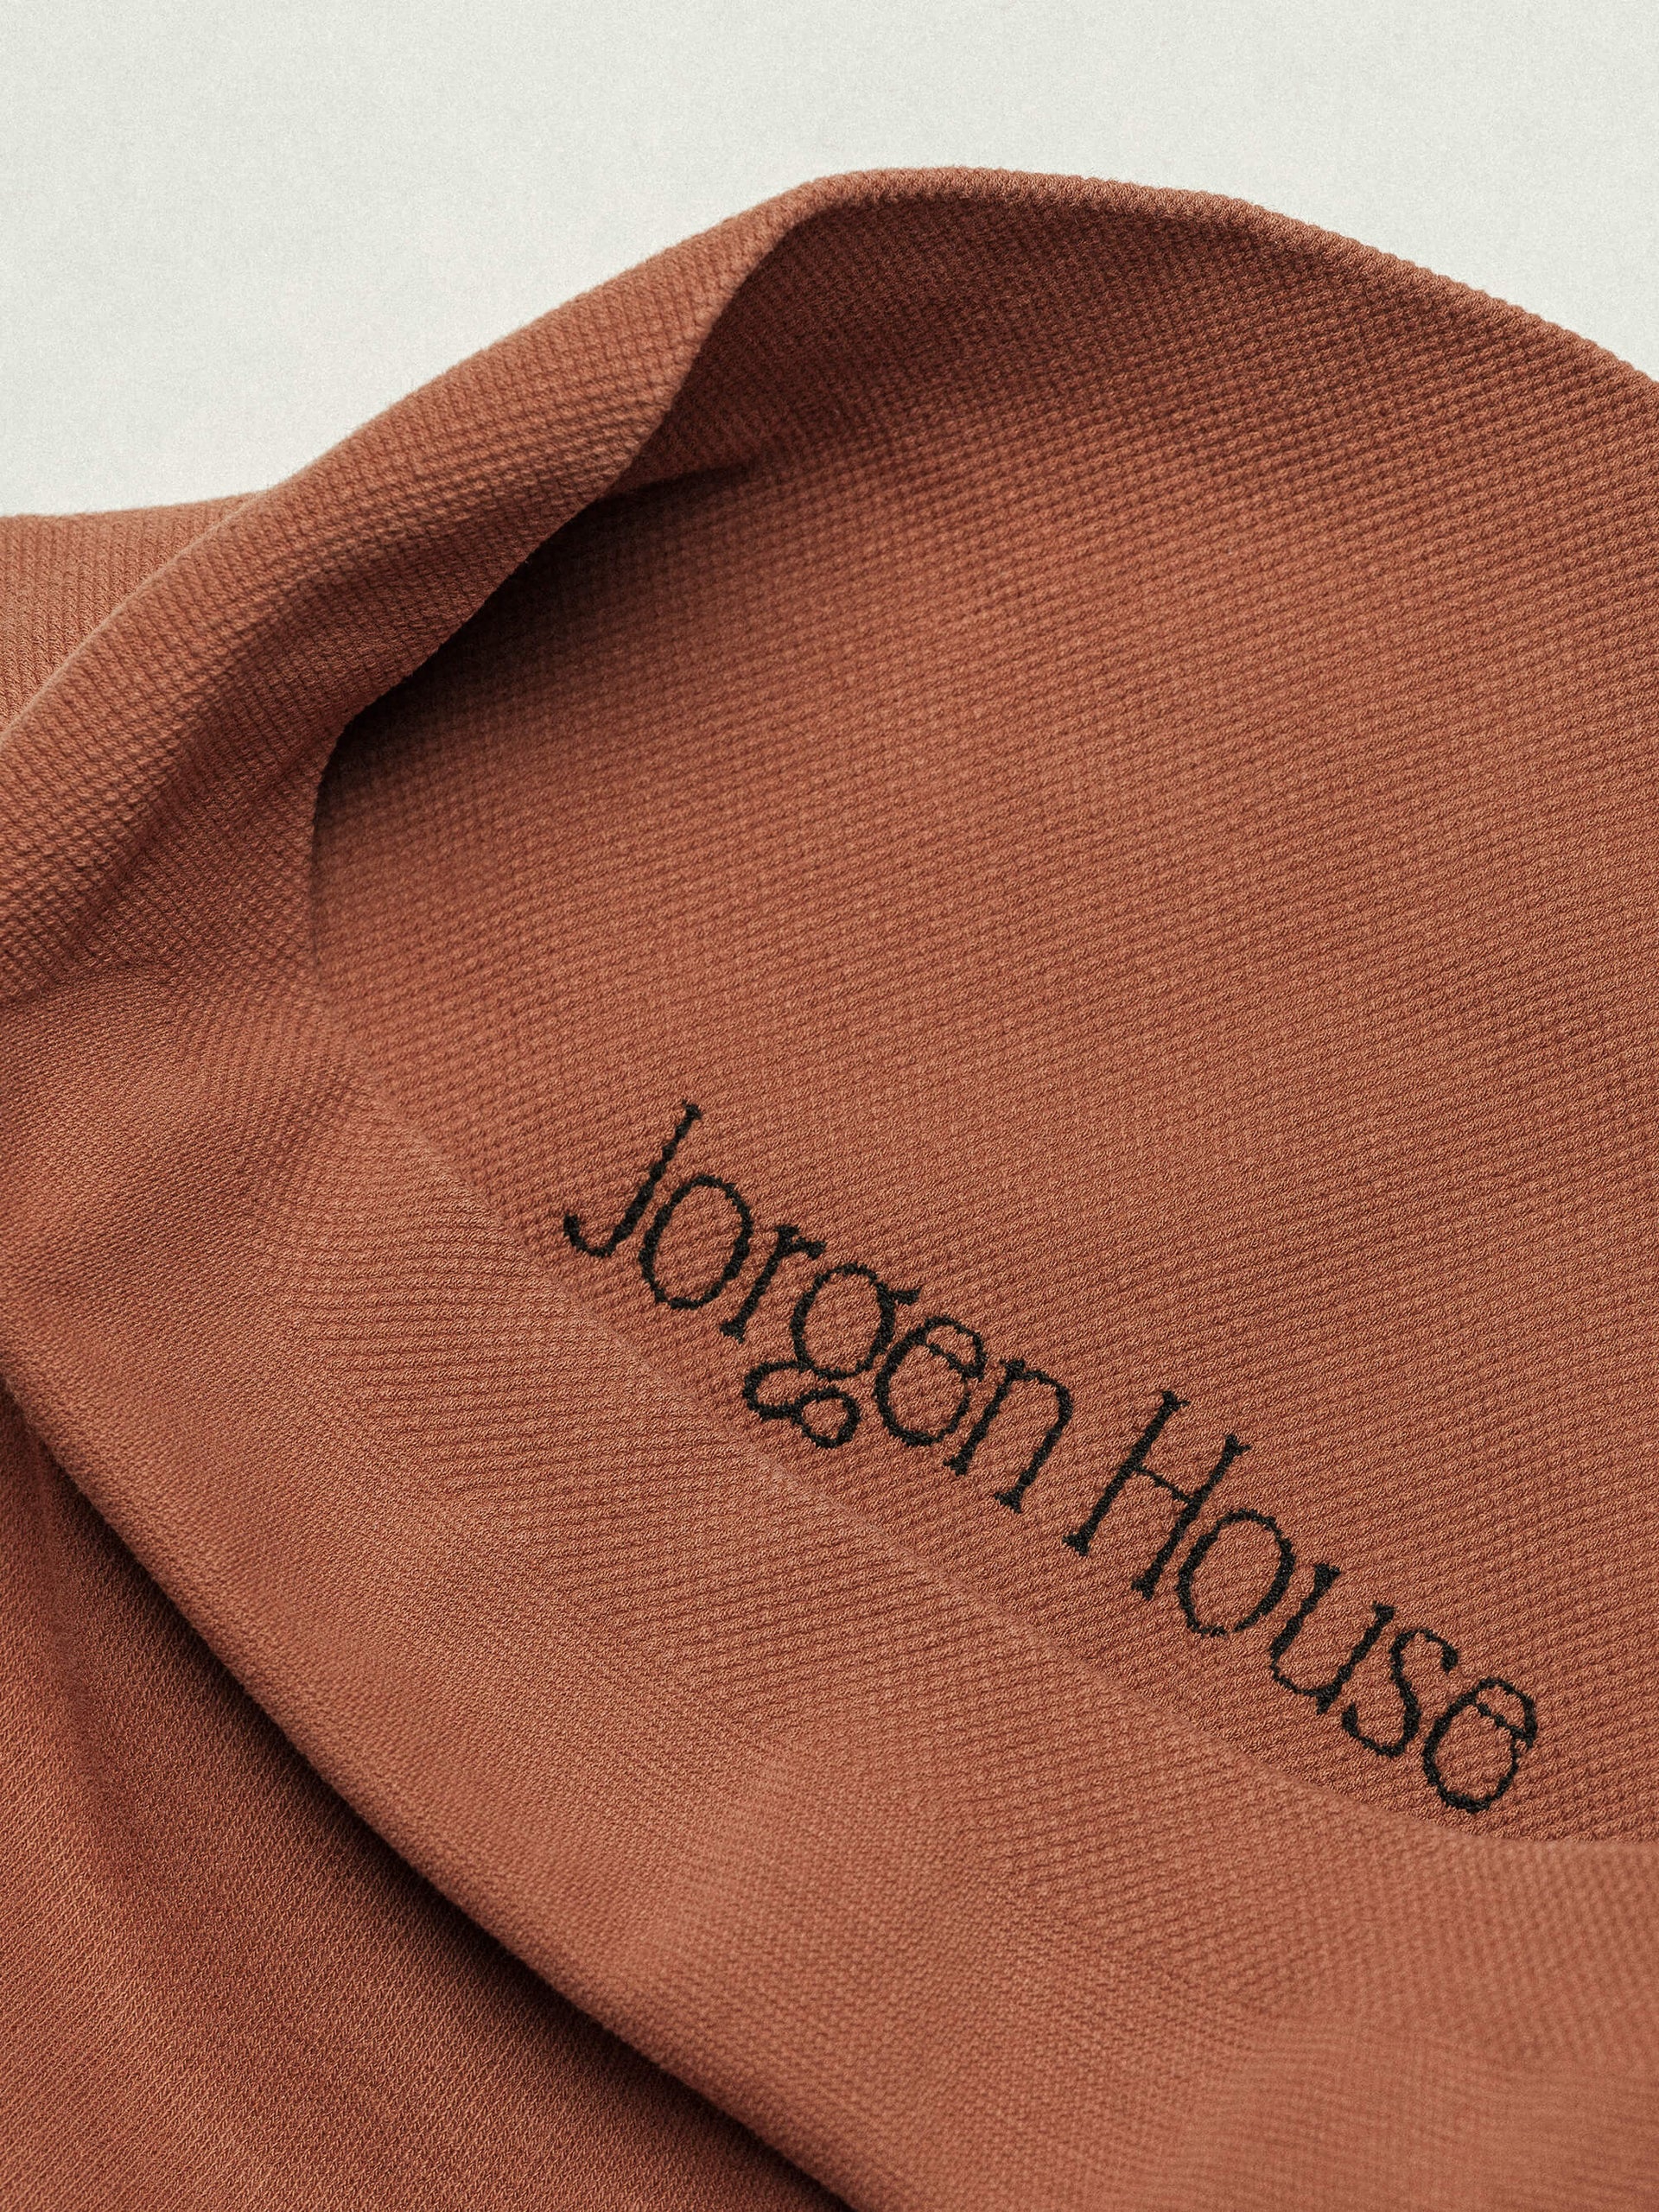 Jorgen House Ginger colour leggings close up view of waistband